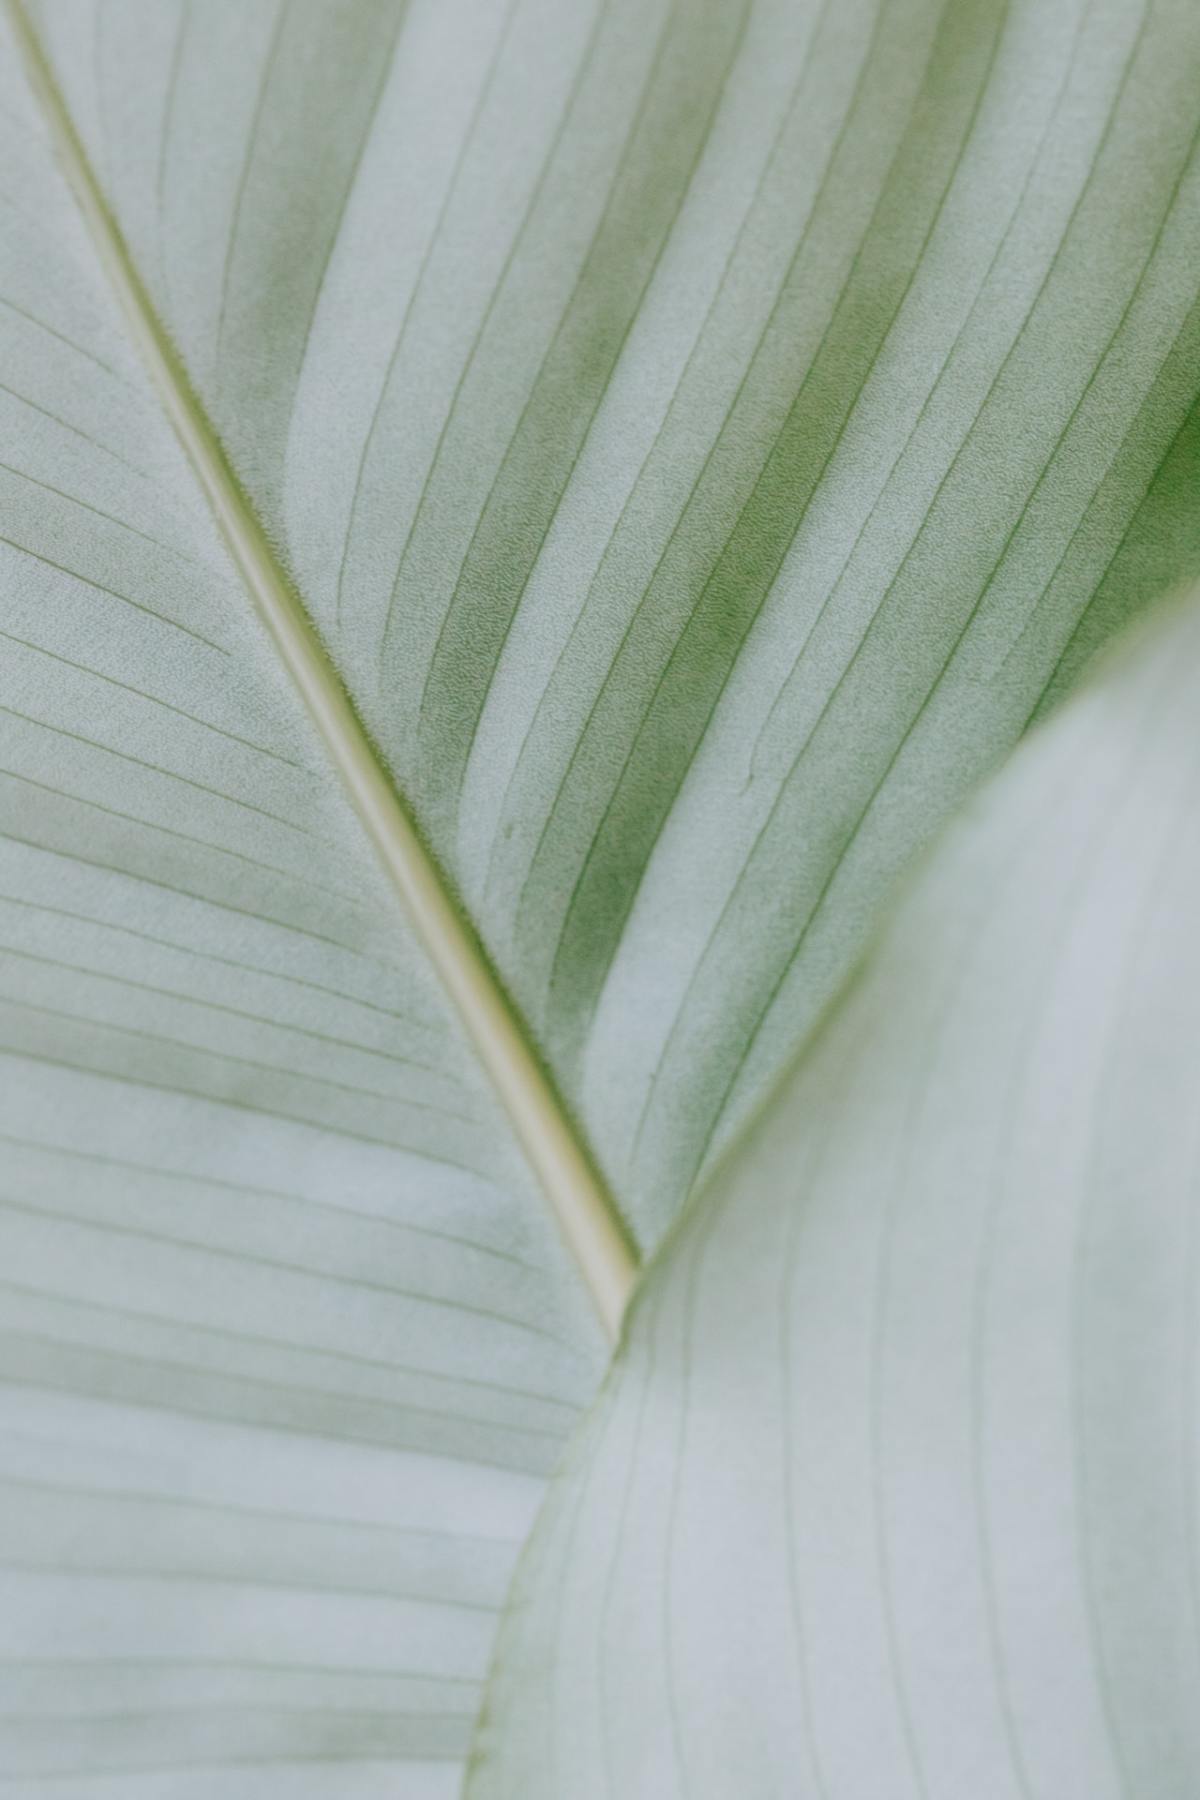 macro photography of a leaf